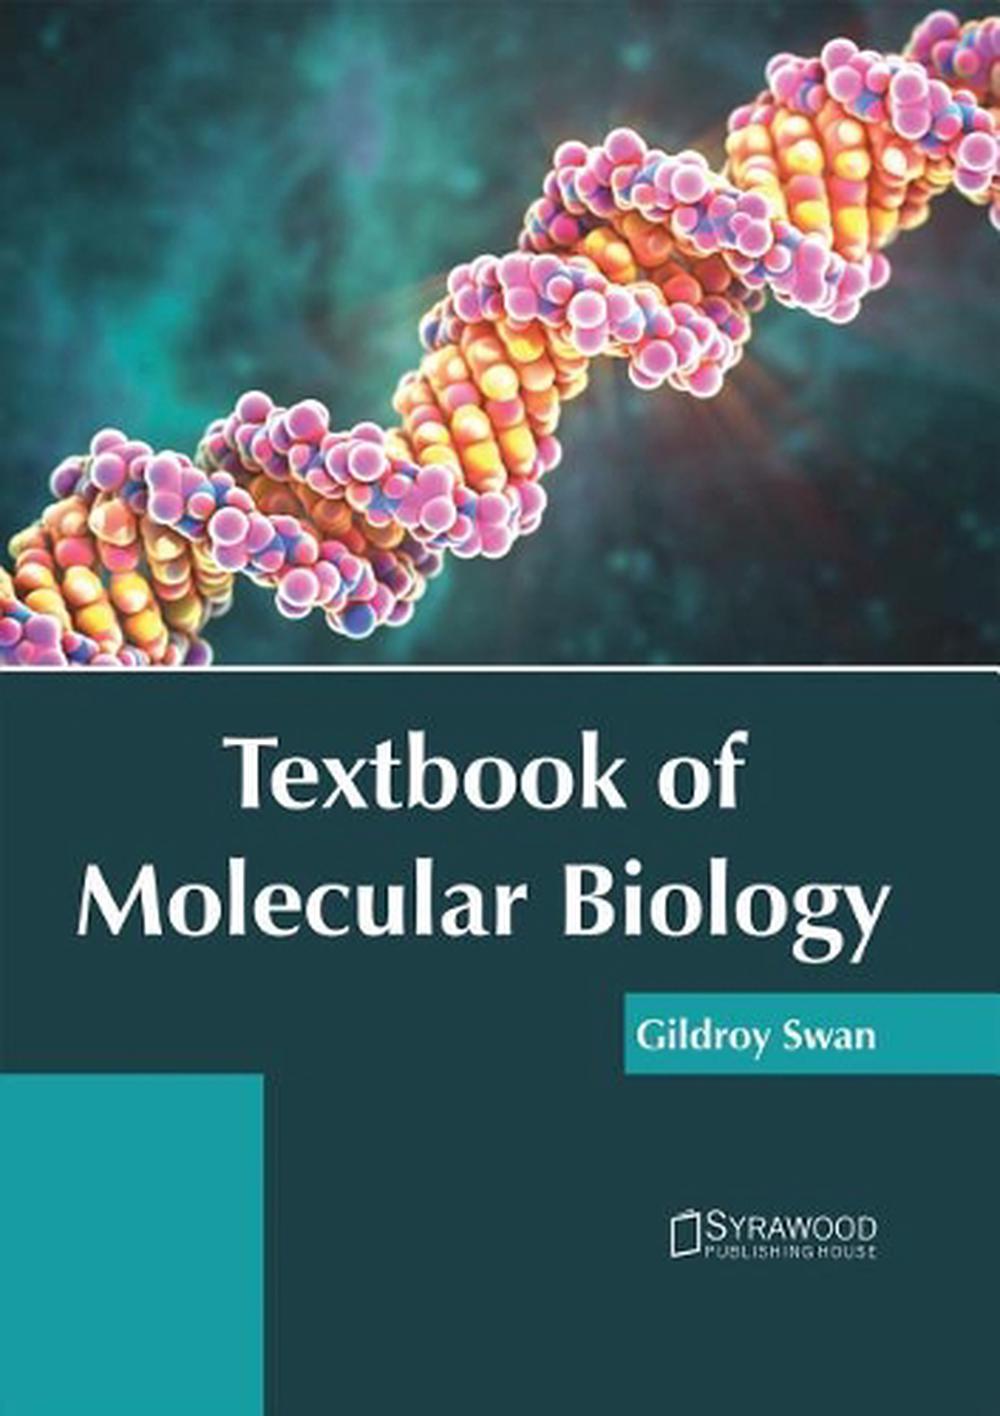 what is molecular biology all about